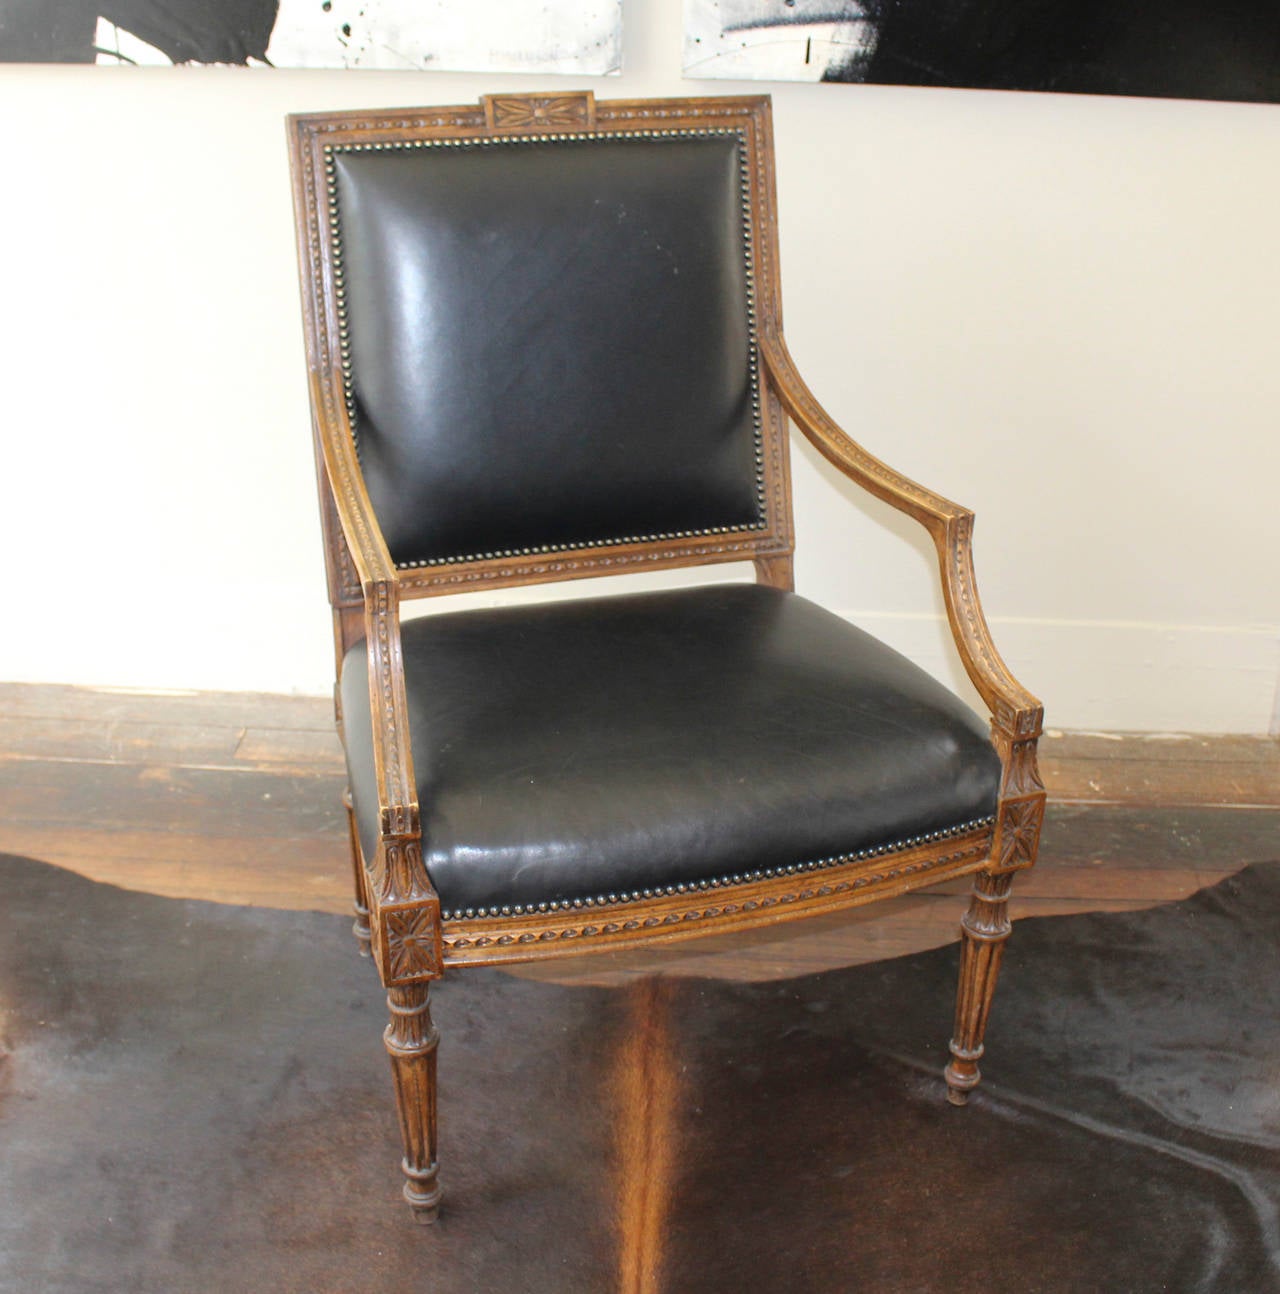 Leather upholstered bergere with carved frame and brass nailheads.
Ideal as a desk or occasional chair.